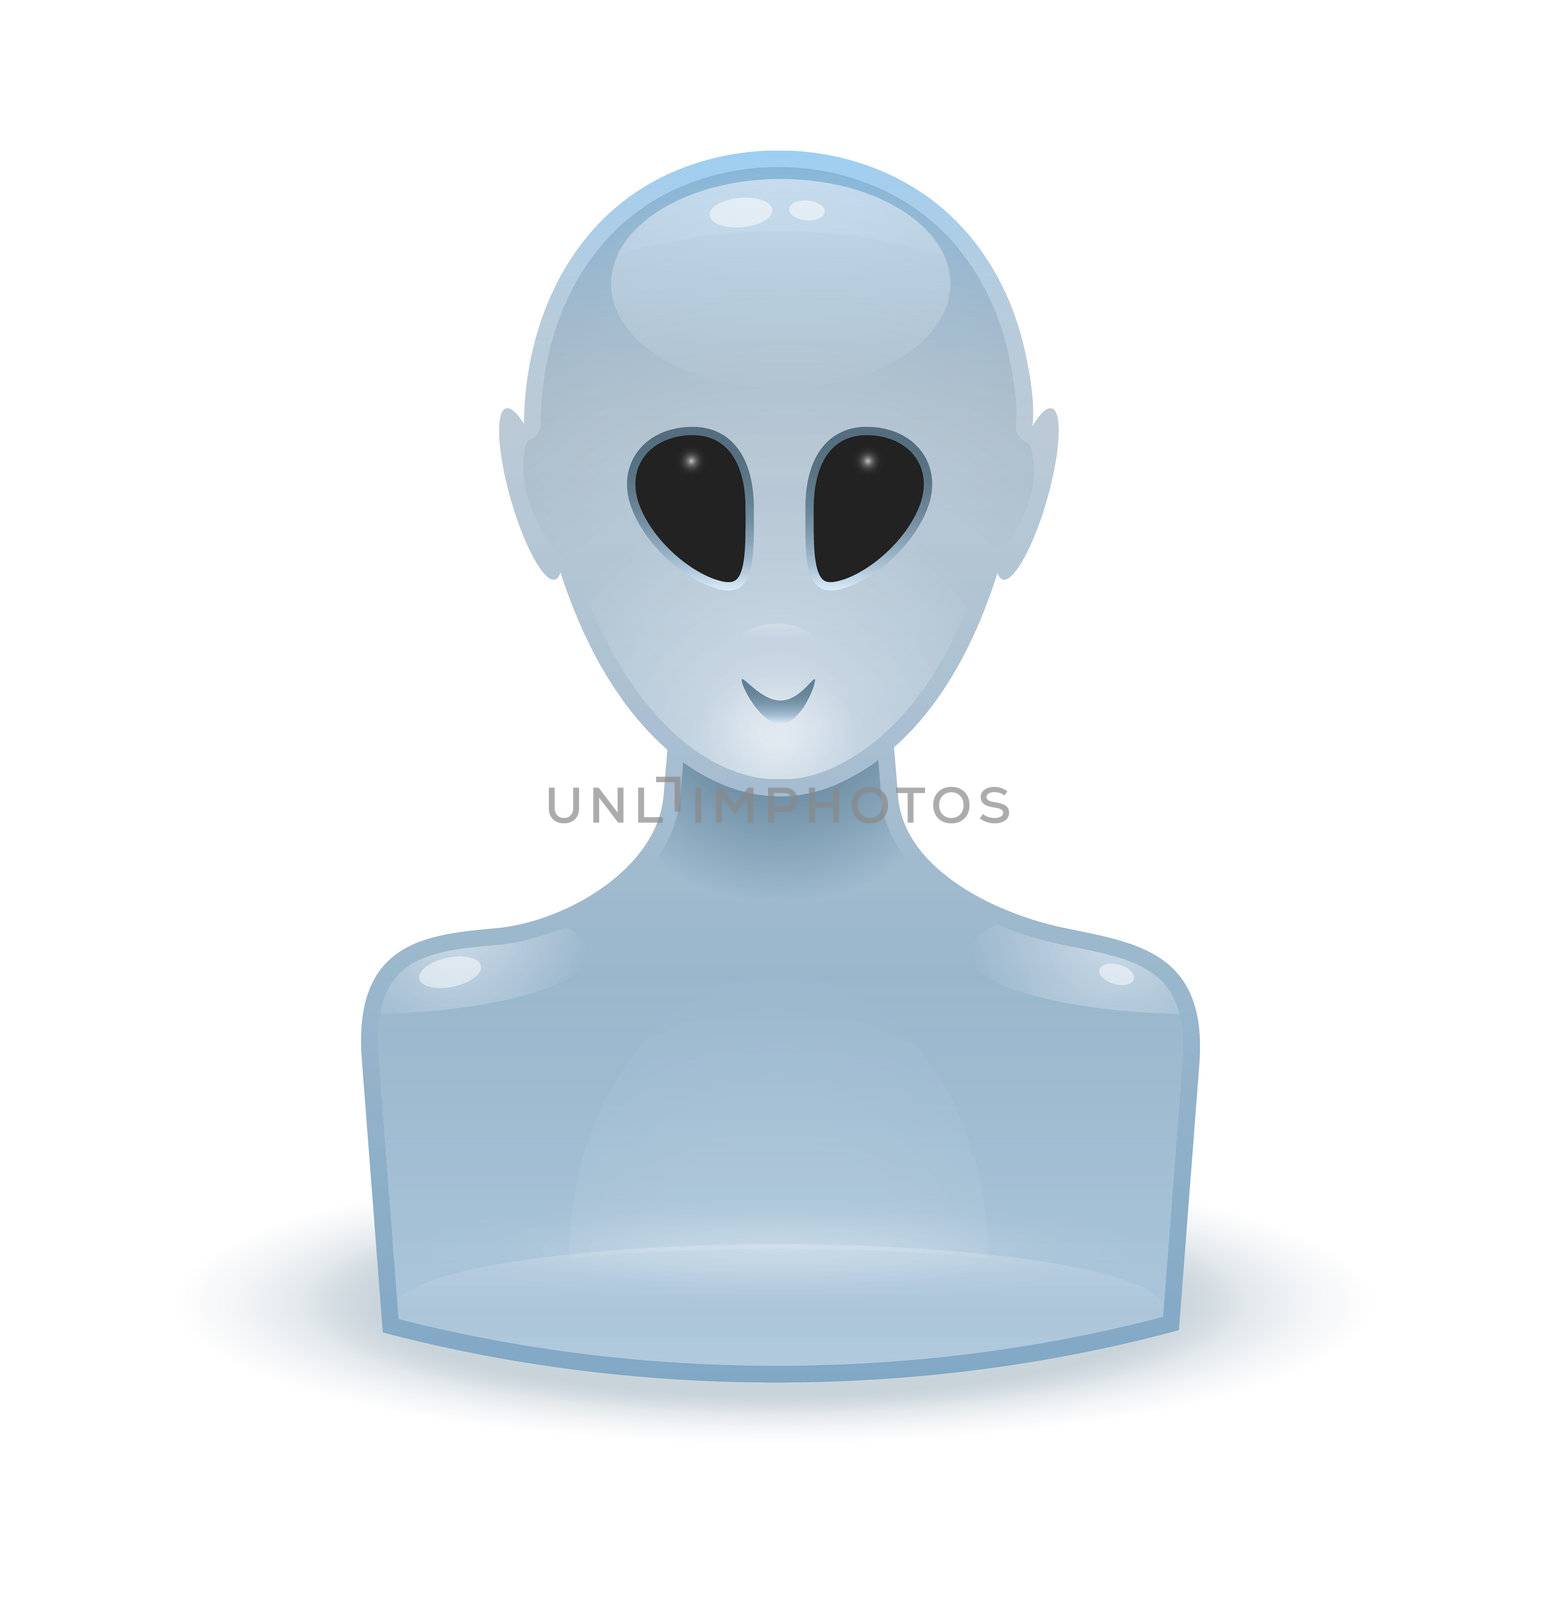 An image of an glossy web icon alien